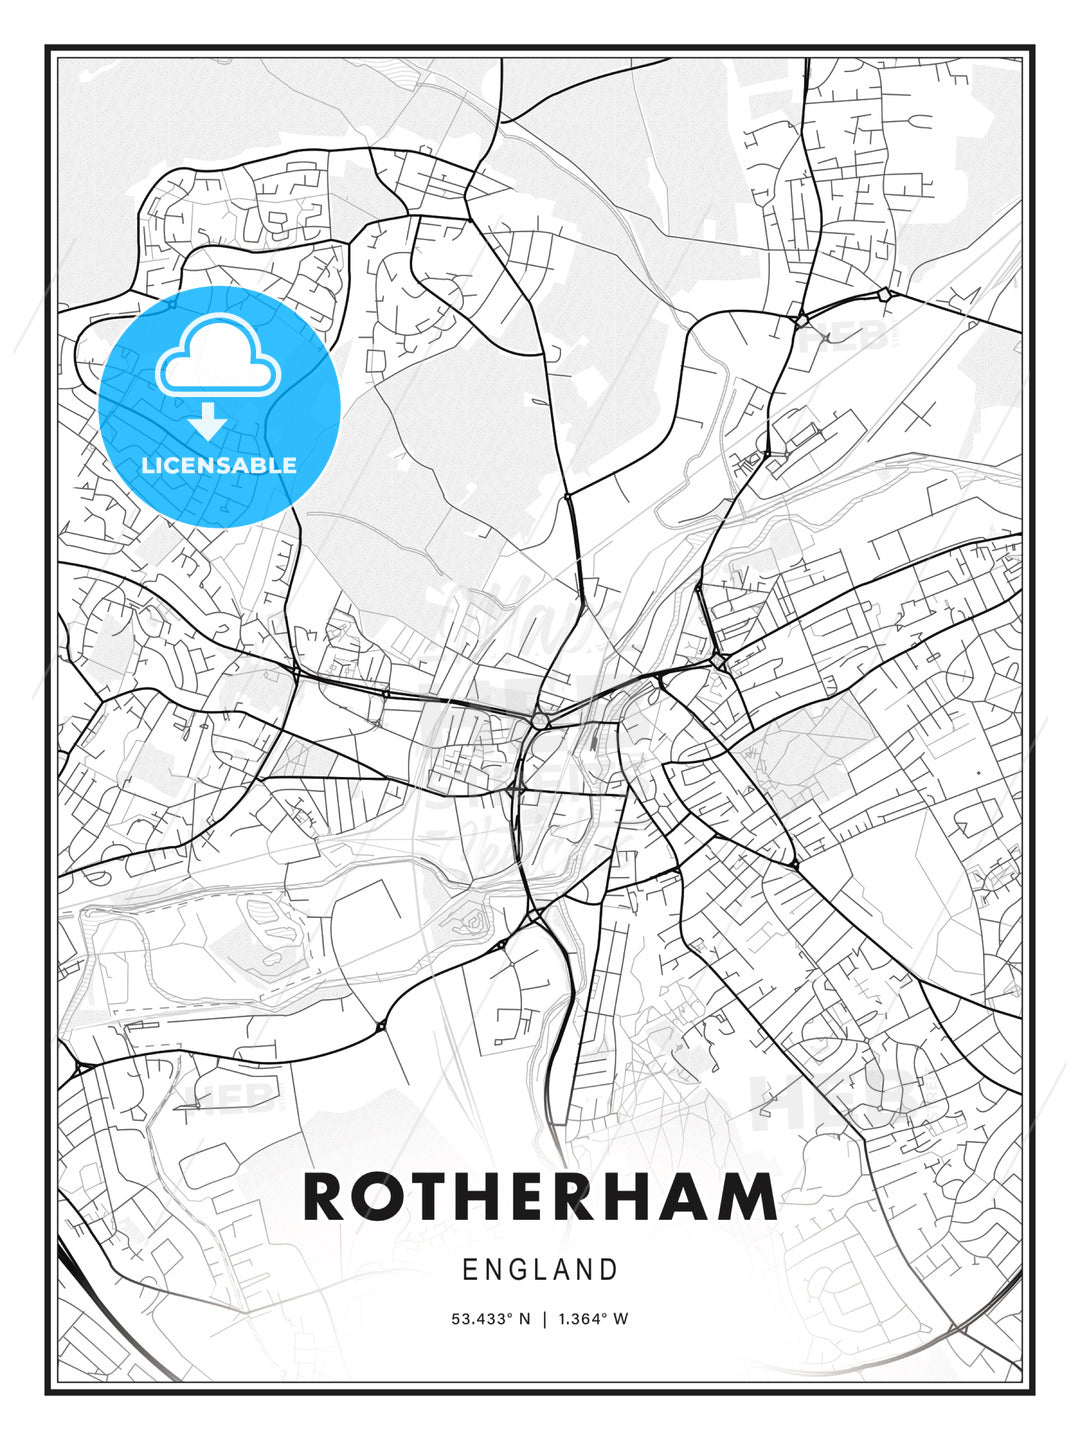 Rotherham, England, Modern Print Template in Various Formats - HEBSTREITS Sketches